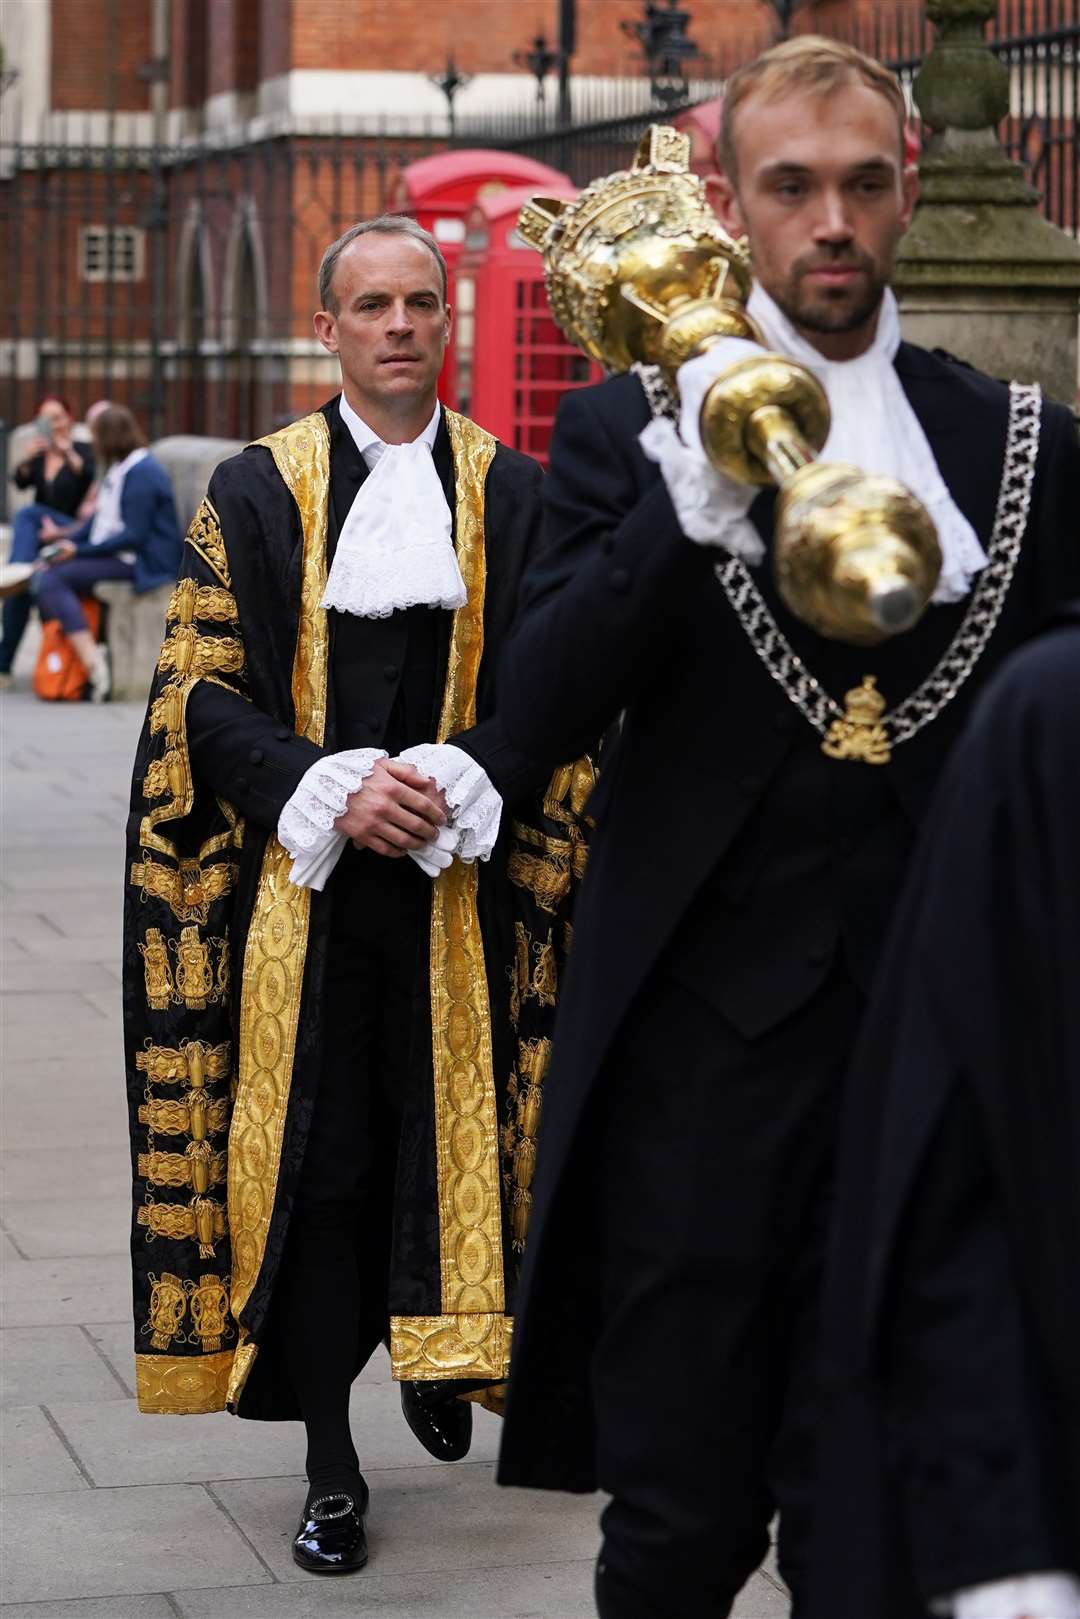 The new Lord Chancellor Dominic Raab (left) (Gareth Fuller/PA)